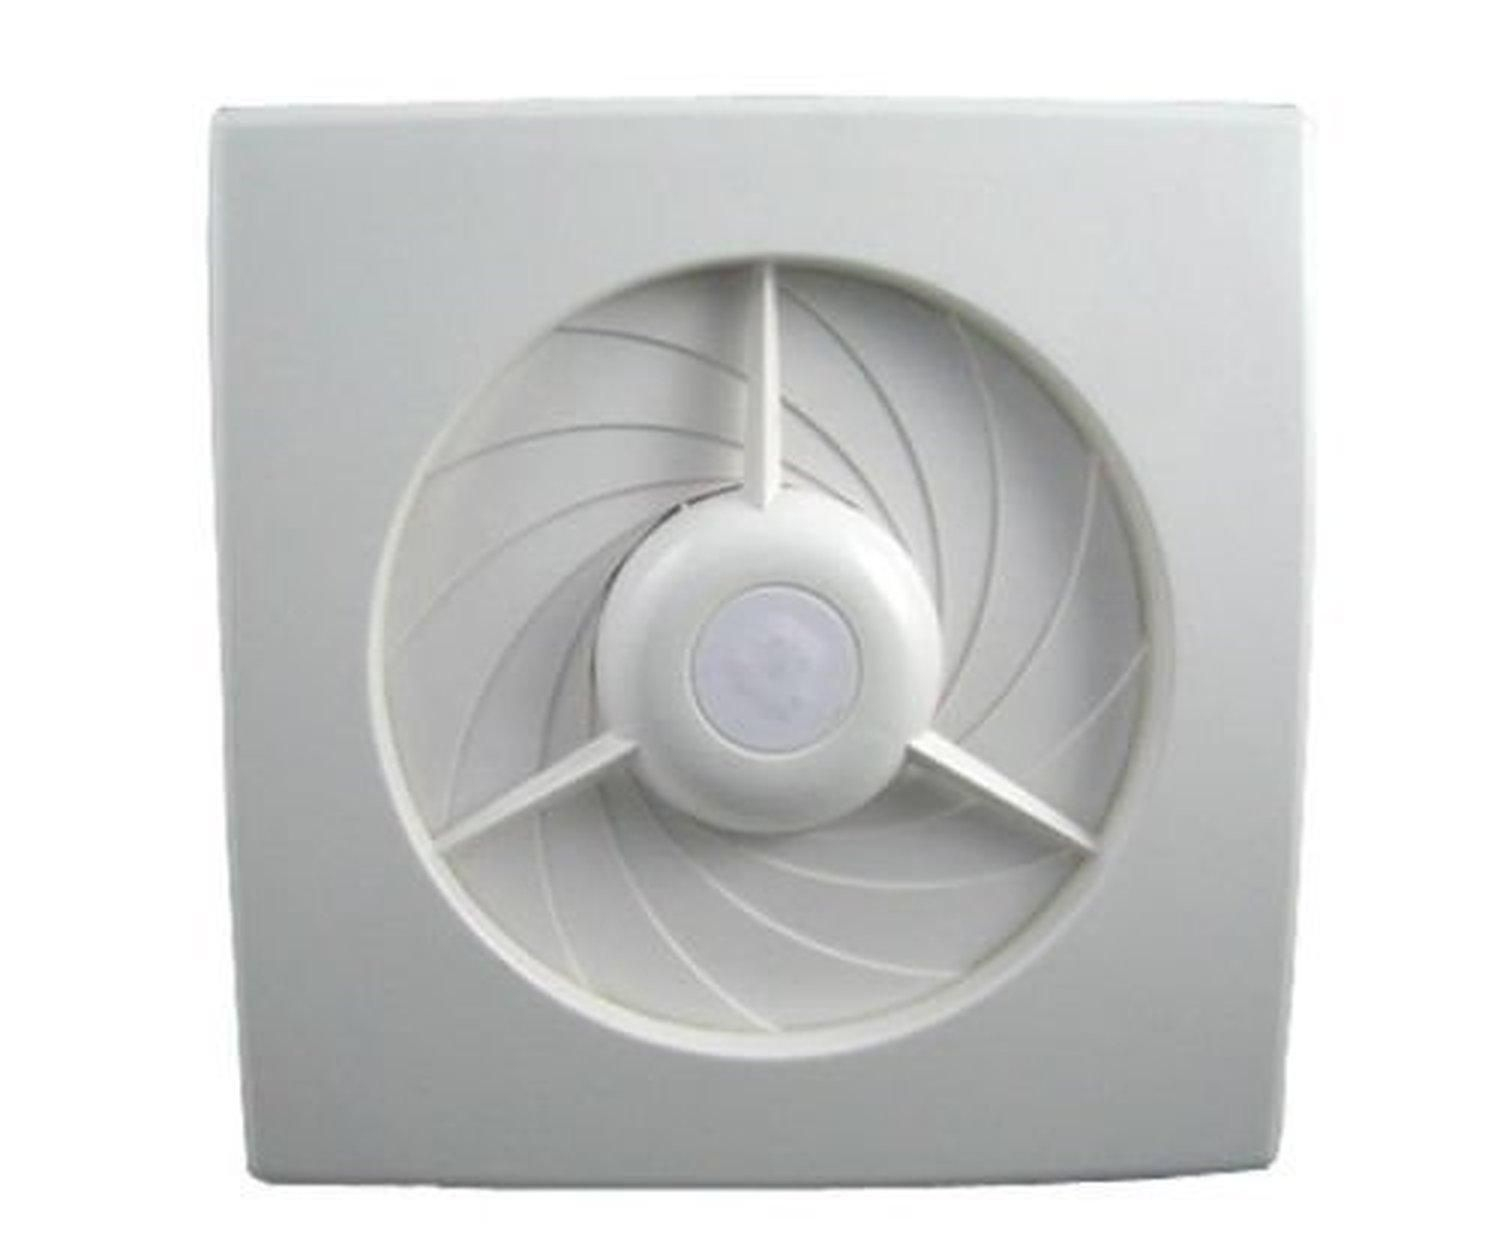 4 6 Inch Extractor Exhaust Fan Window Wall Kitchen within sizing 1500 X 1239